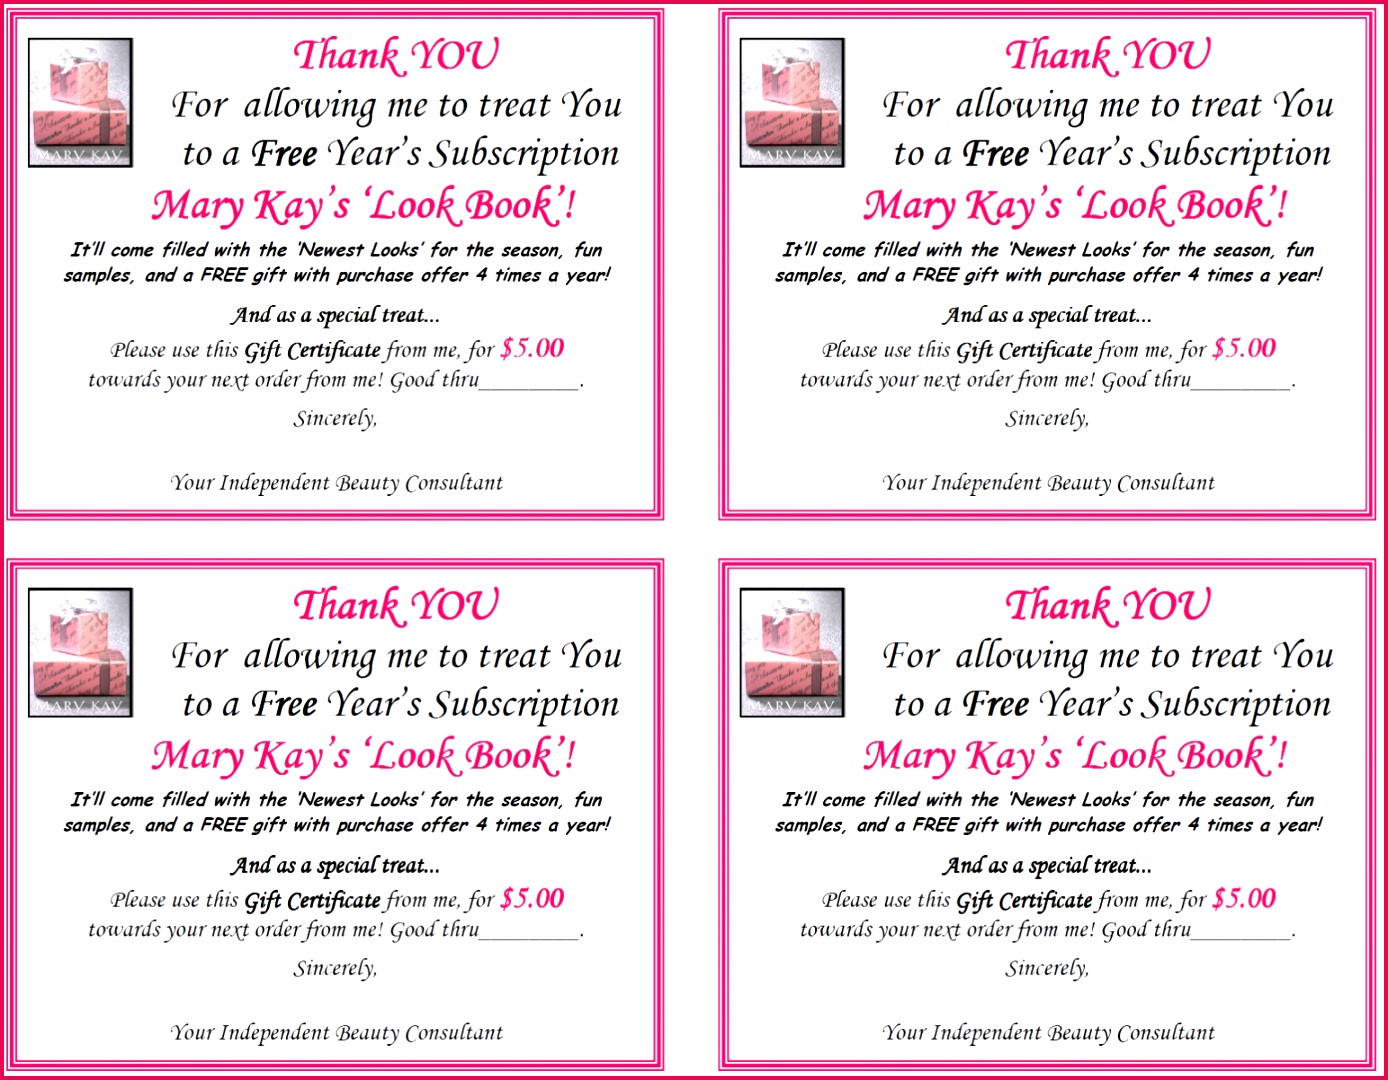 mary kay t certificate simple mary kay t certificates free template t ftempo bu 1491 in mary kay t certificate